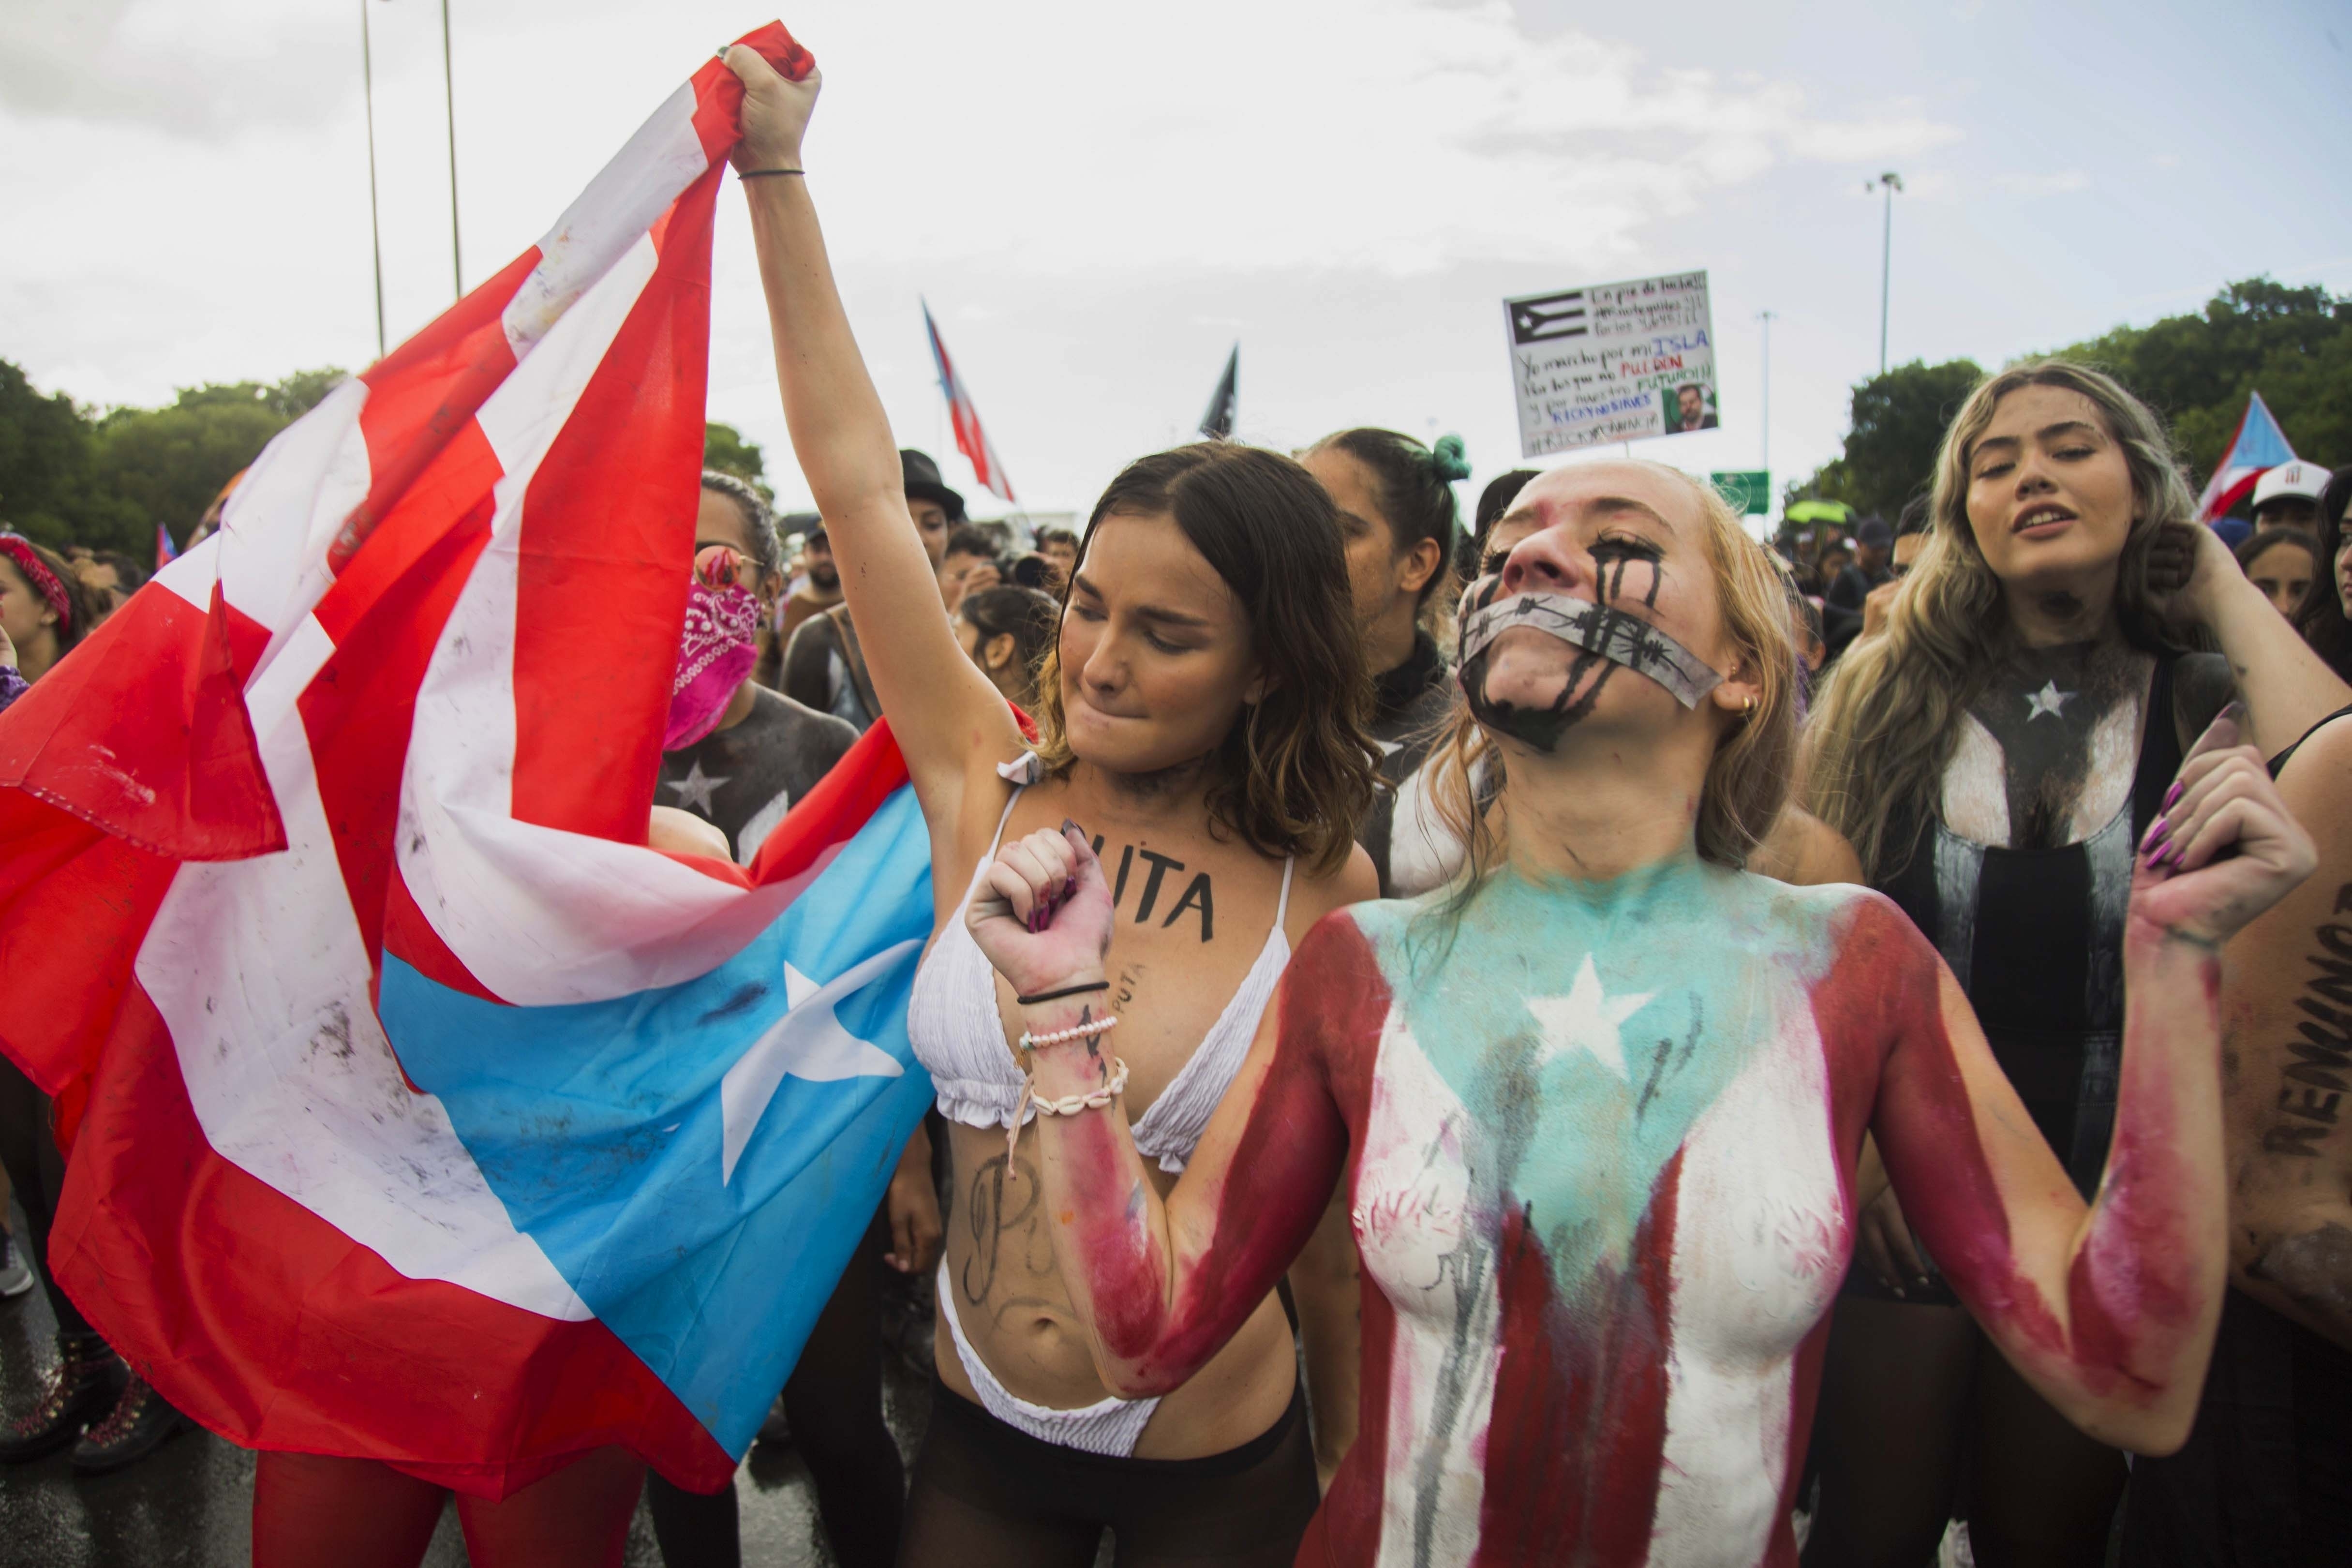 Young women join a protest to demand the resignation of Governor Ricardo Rossello from office, in San Juan, Puerto Rico, Monday, July 22, 2019. Protesters are demanding Rossello step down for his involvement in a private chat in which he used profanities to describe an ex-New York City councilwoman and a federal control board overseeing the island's finance. (AP Photo/Dennis M. Rivera Pichardo)